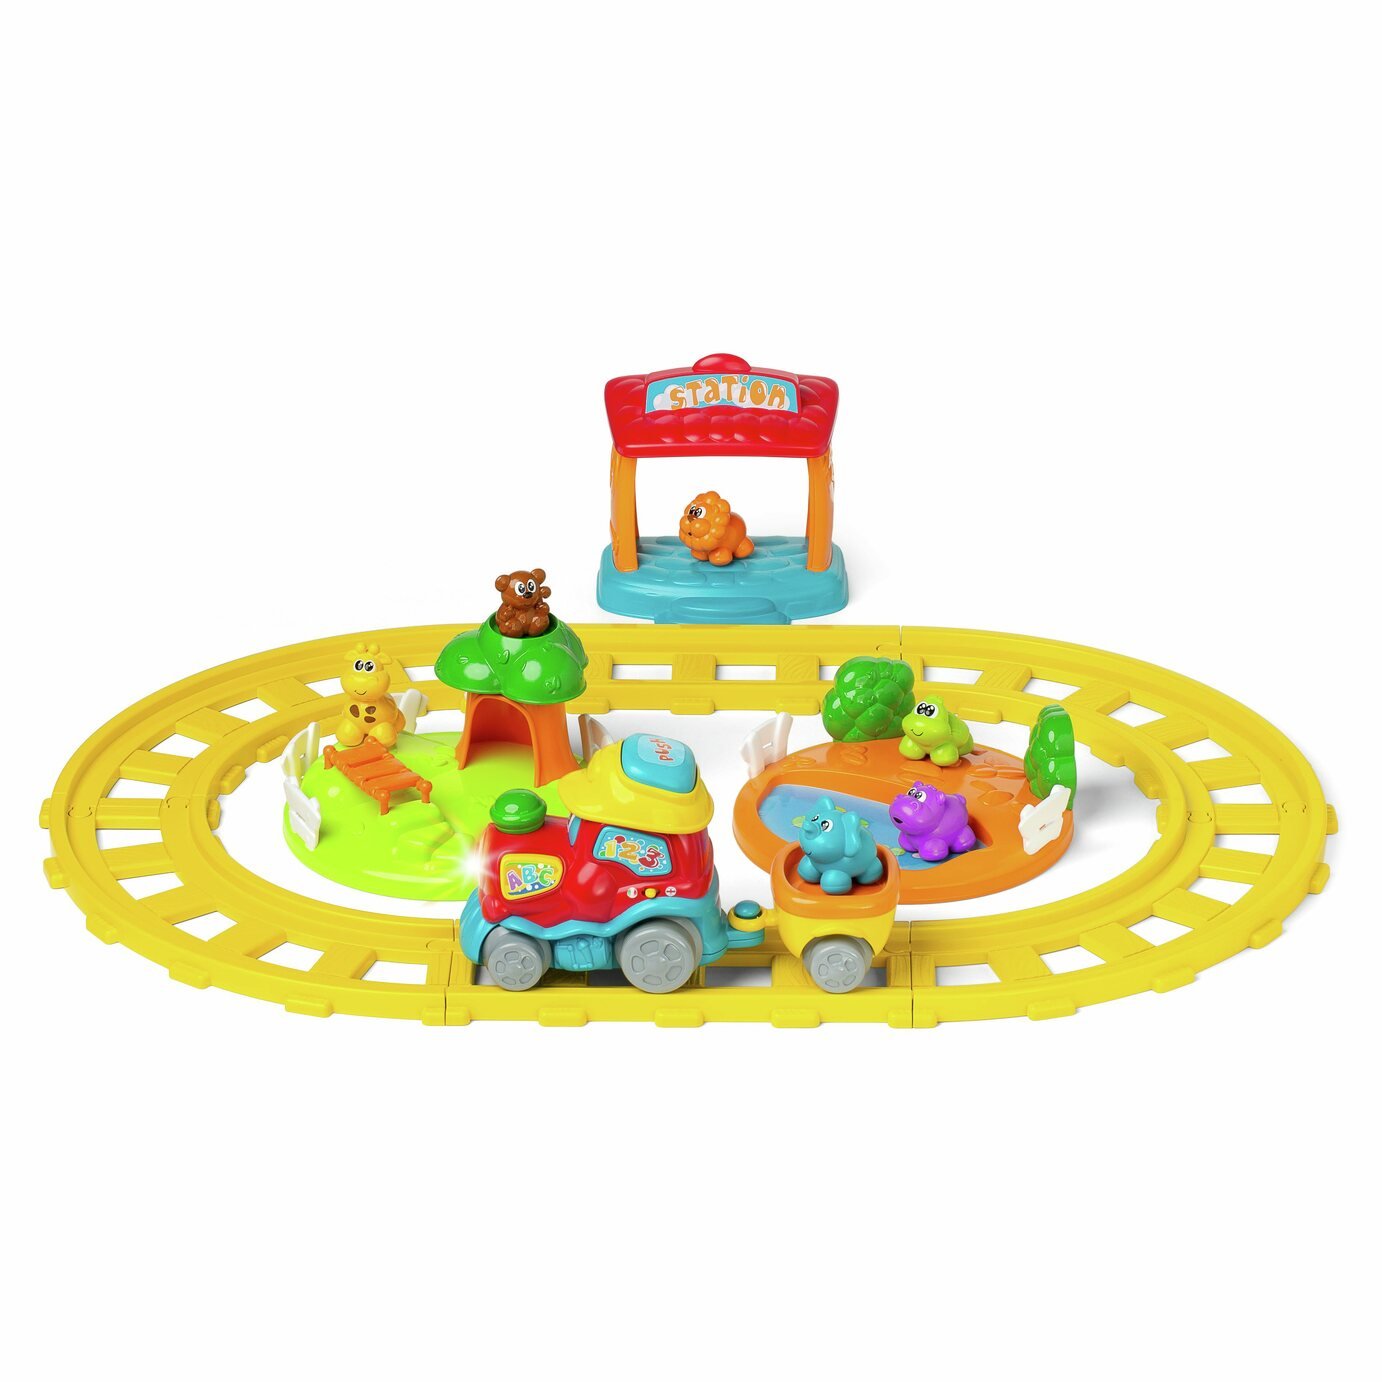 Adventure Train by Chicco Review